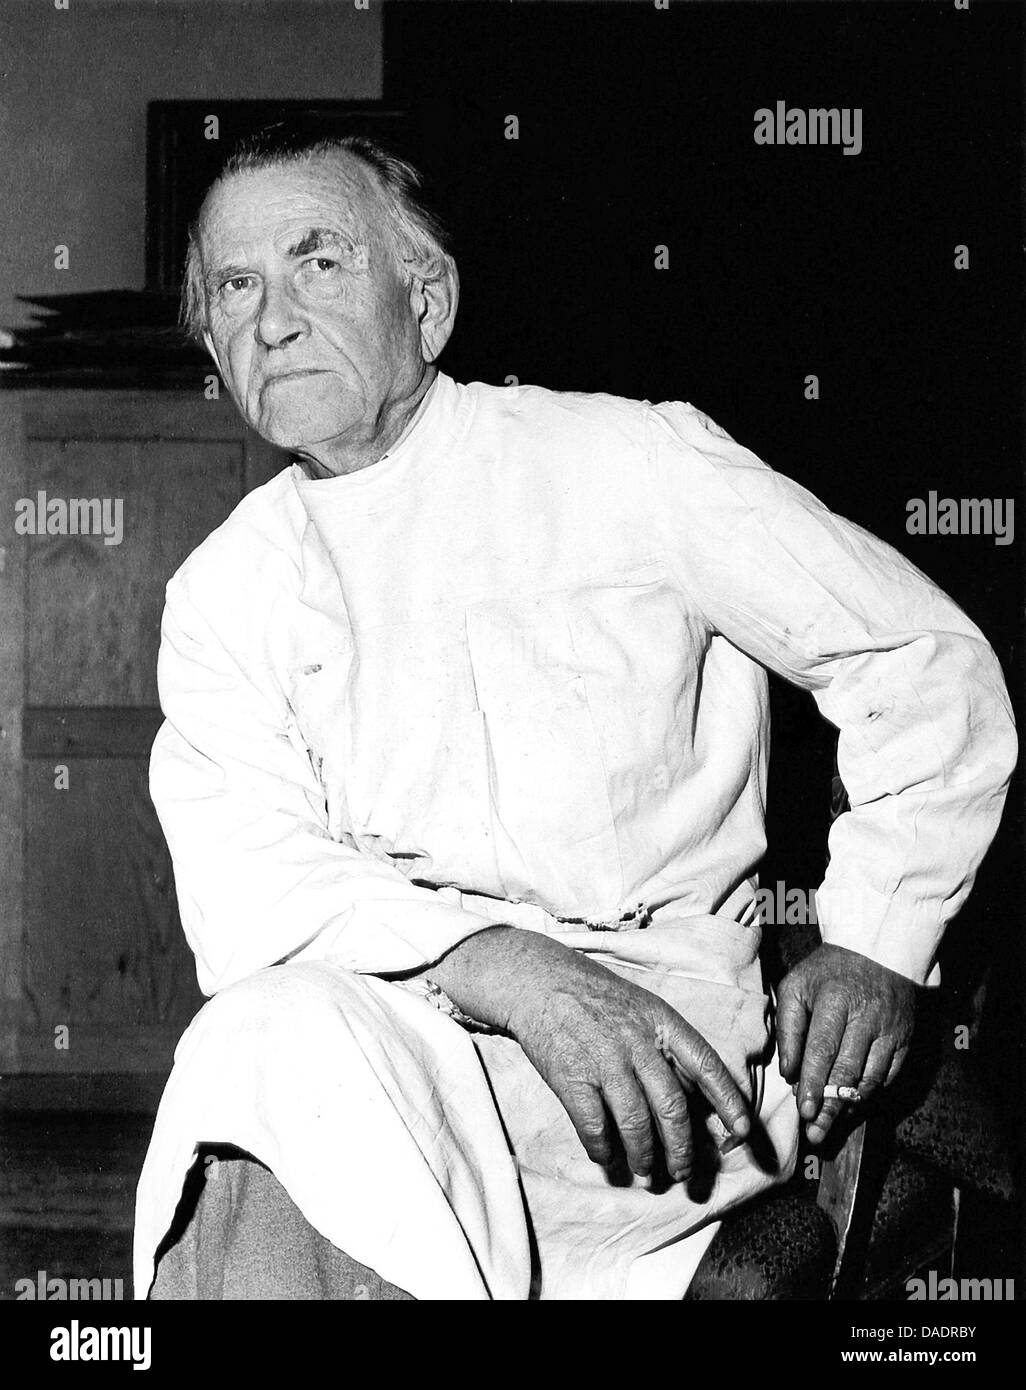 Artist Otto Dix in 1961. Portrait by photographer Fred Stein (1909-1967) who emigrated 1933 from Nazi Germany to France and finally to the USA. Stock Photo